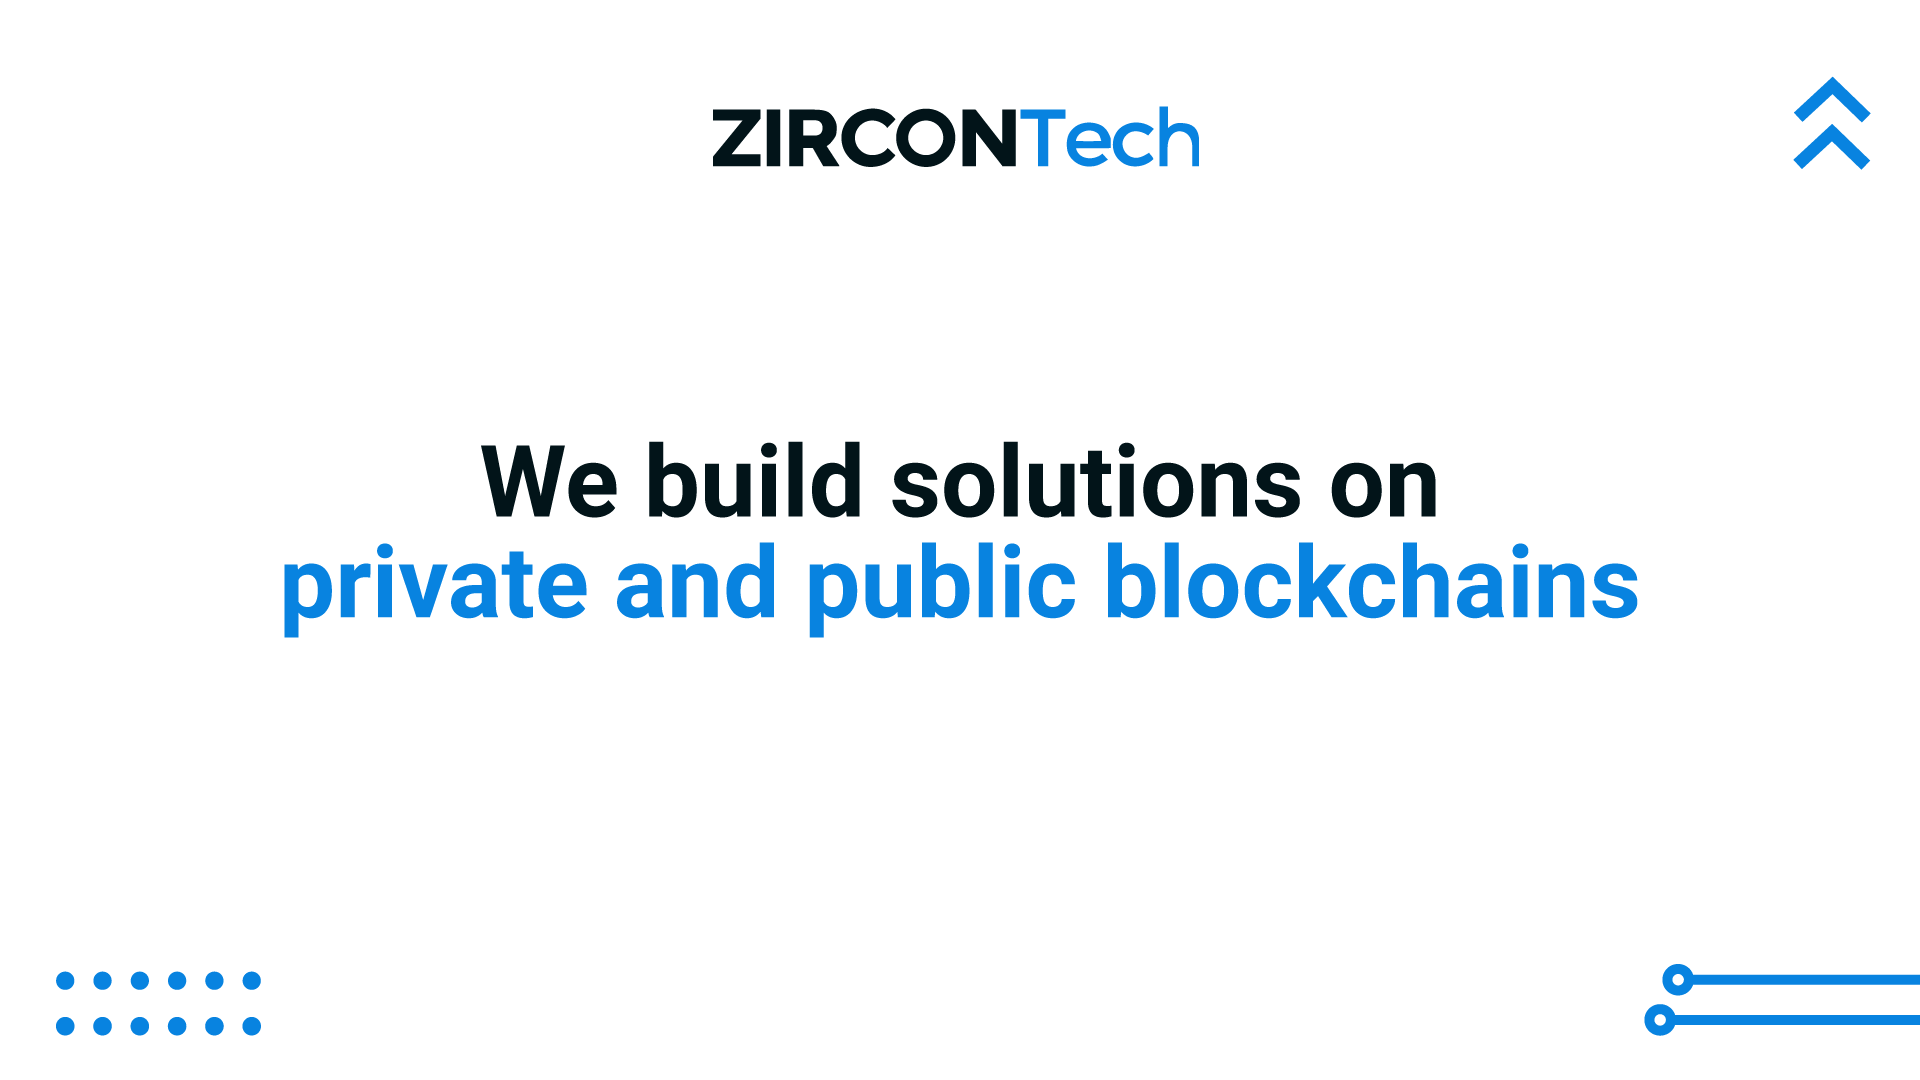 We build solutions on private and public blockchains